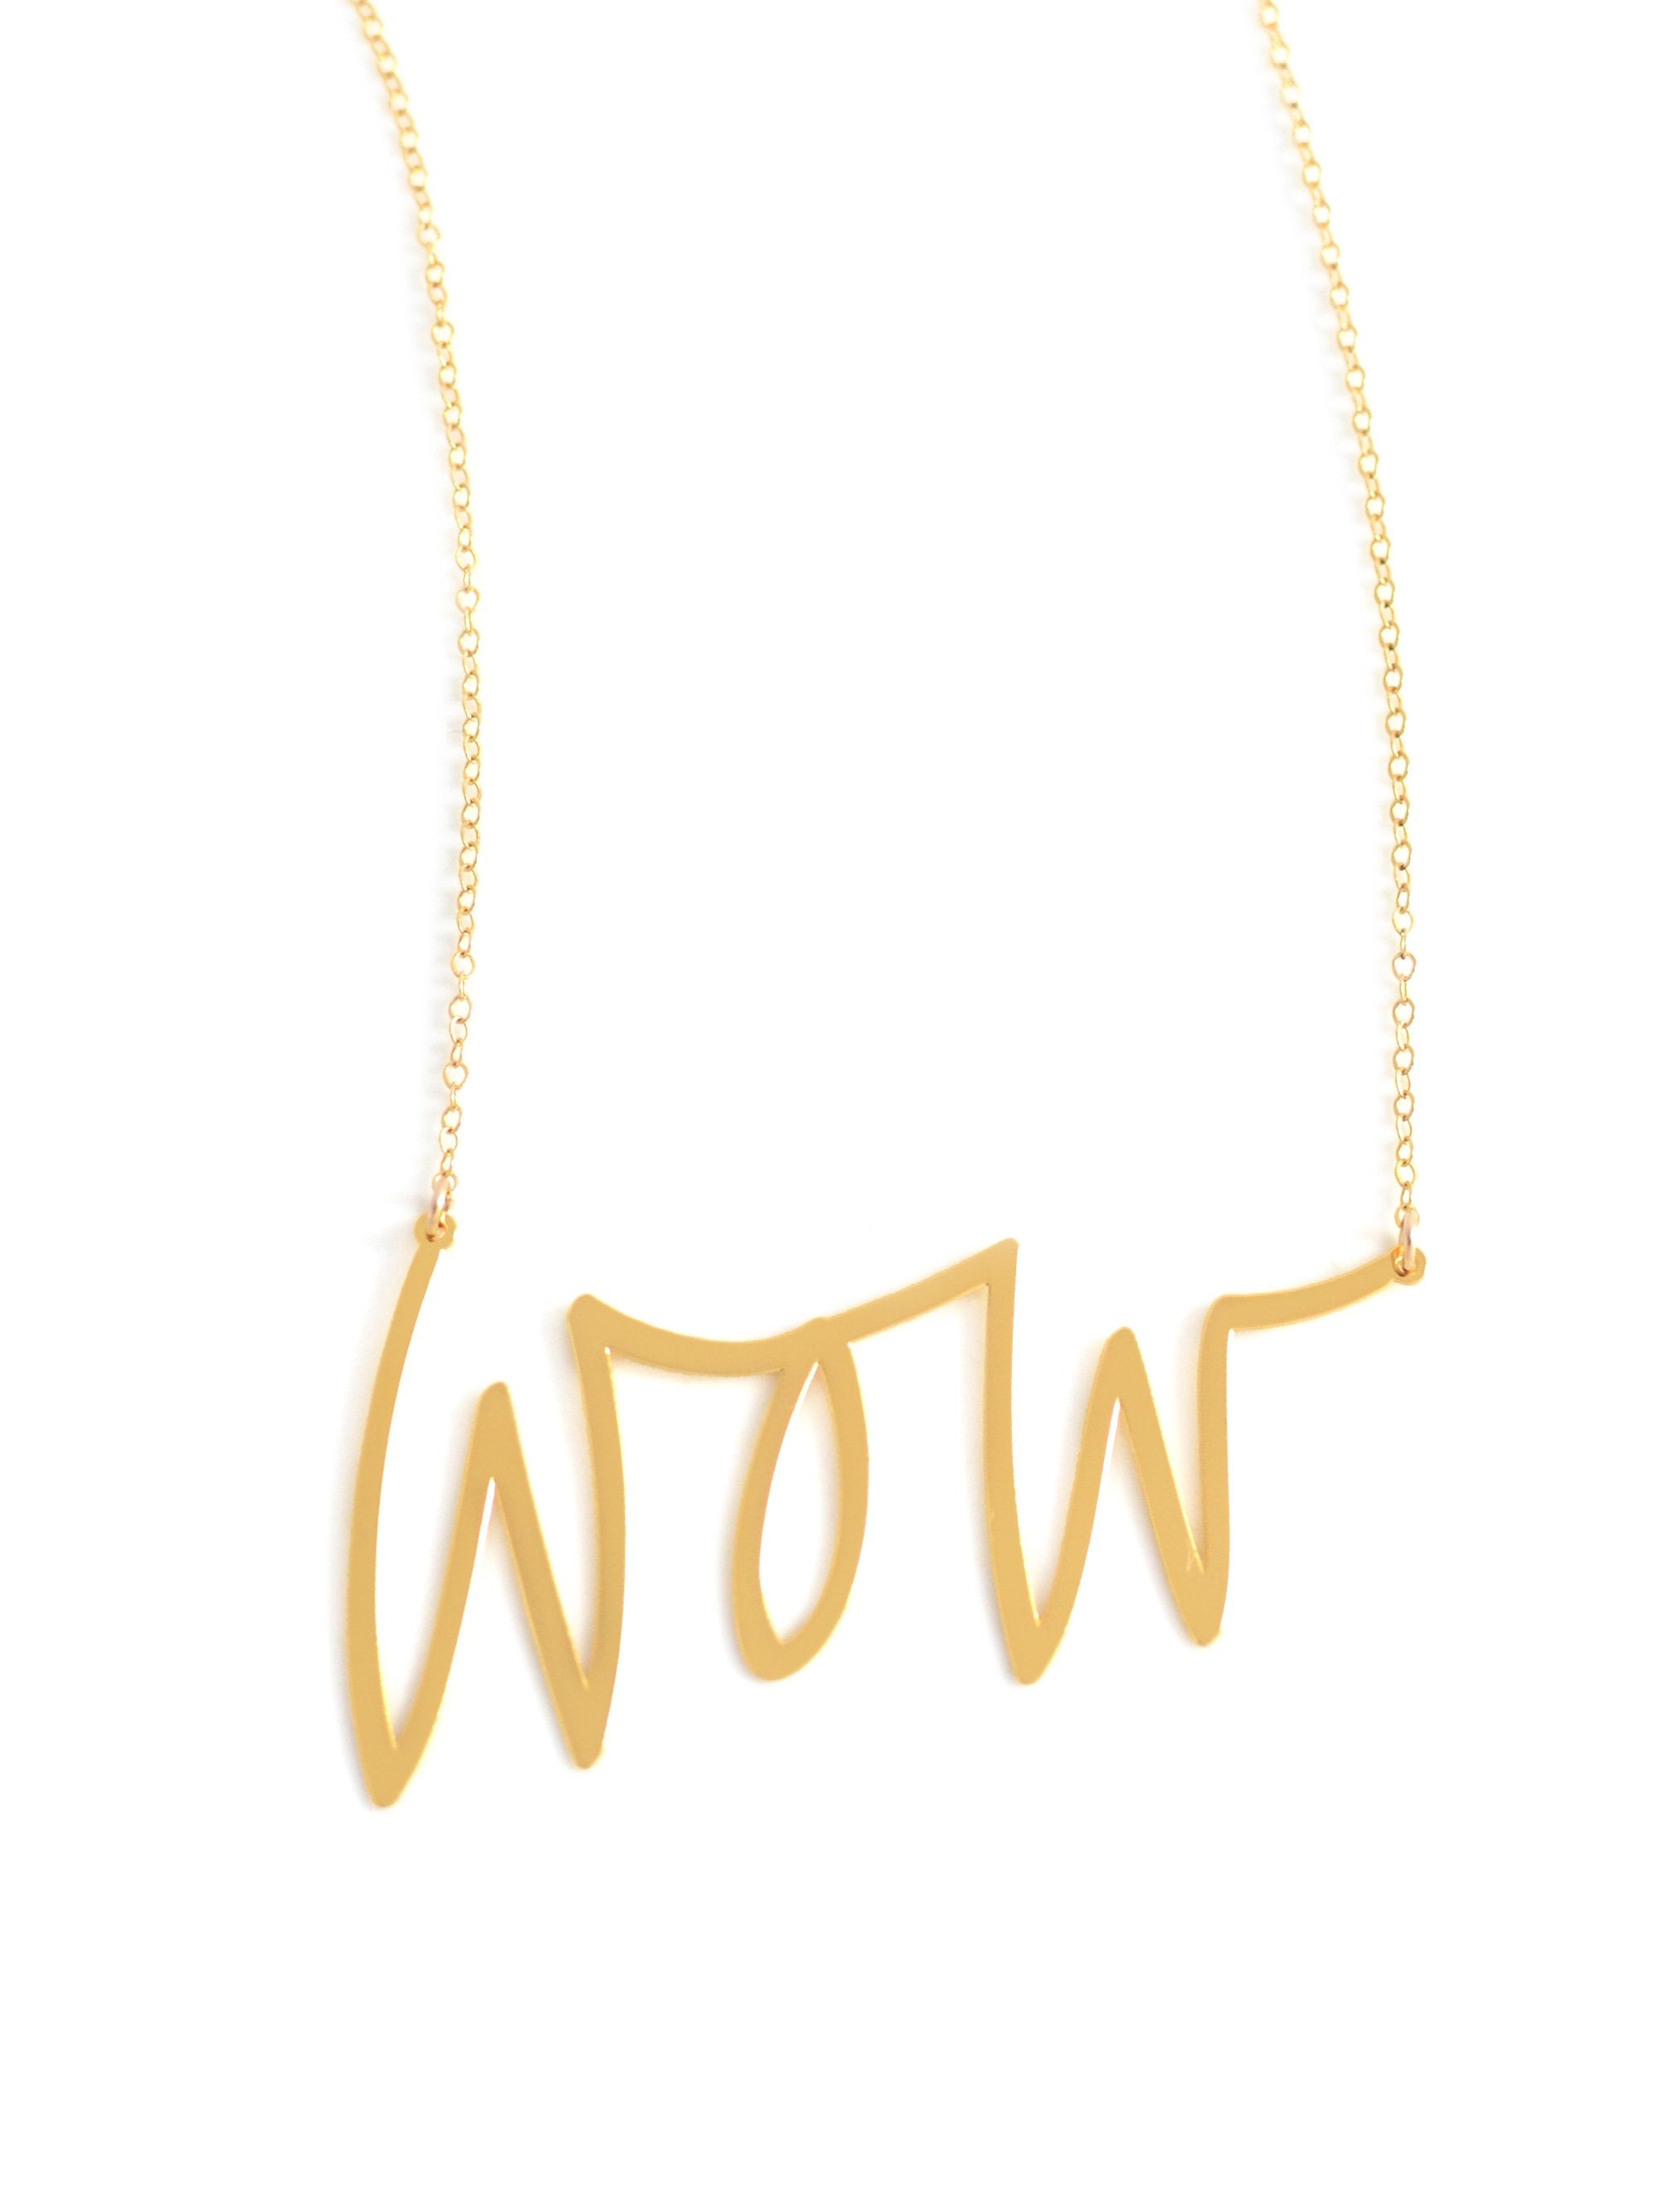 Wow Necklace - High Quality, Affordable, Hand Written, Self Love, Mantra Word Necklace - Available in Gold and Silver - Small and Large Sizes - Made in USA - Brevity Jewelry